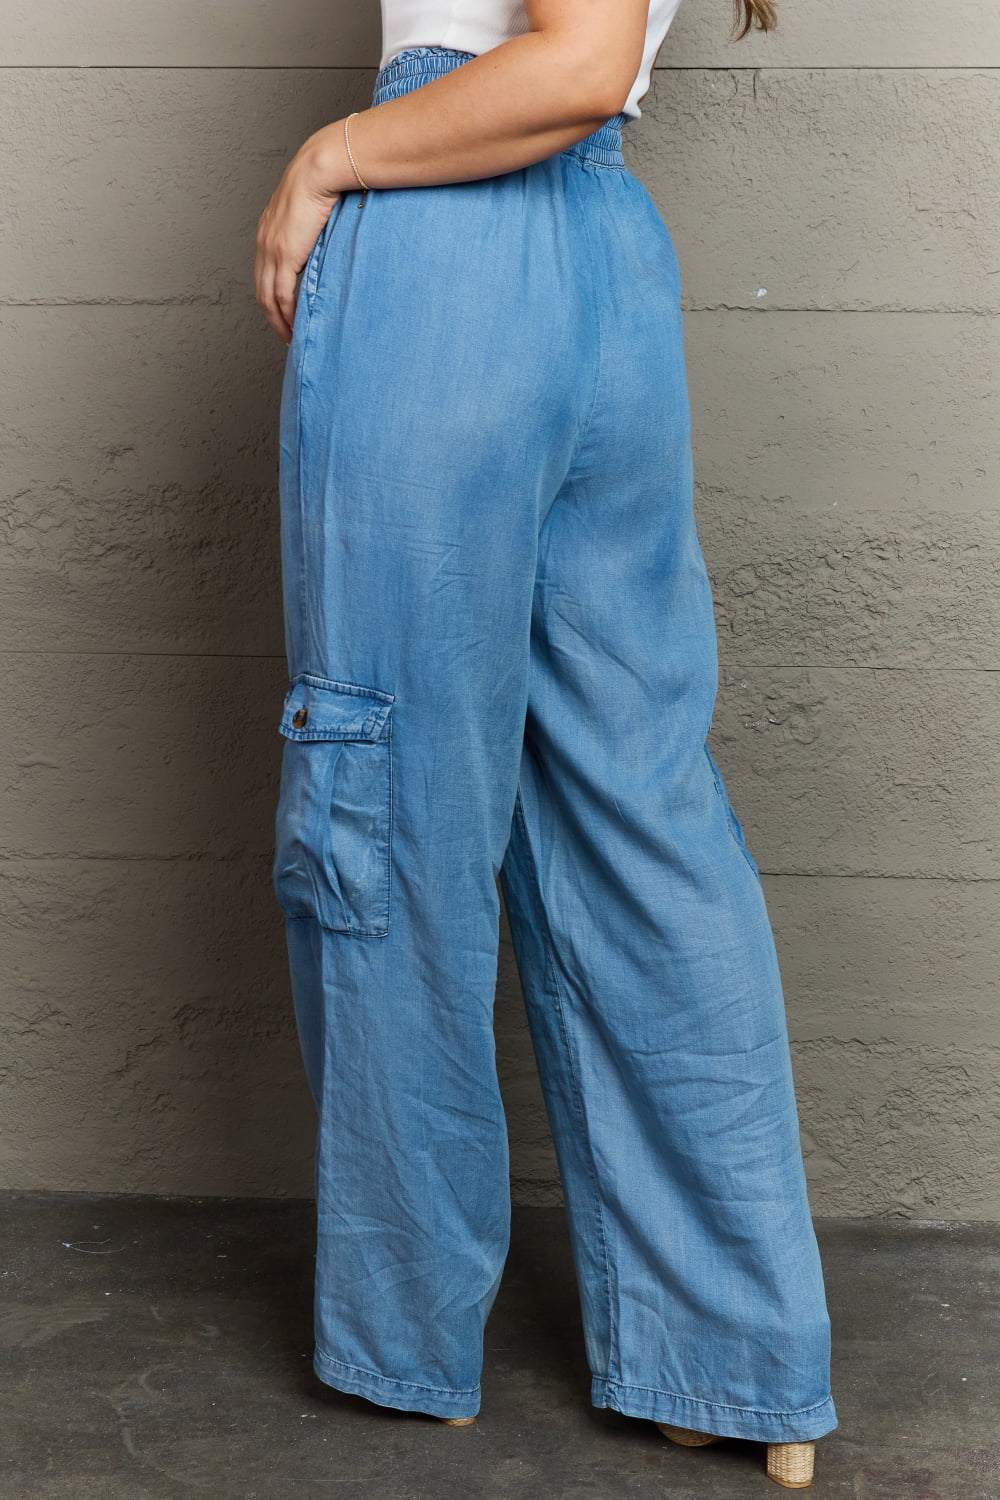 Dim Gray GeeGee Out Of Site Full Size Denim Cargo Pants Sentient Beauty Fashions Apparel & Accessories